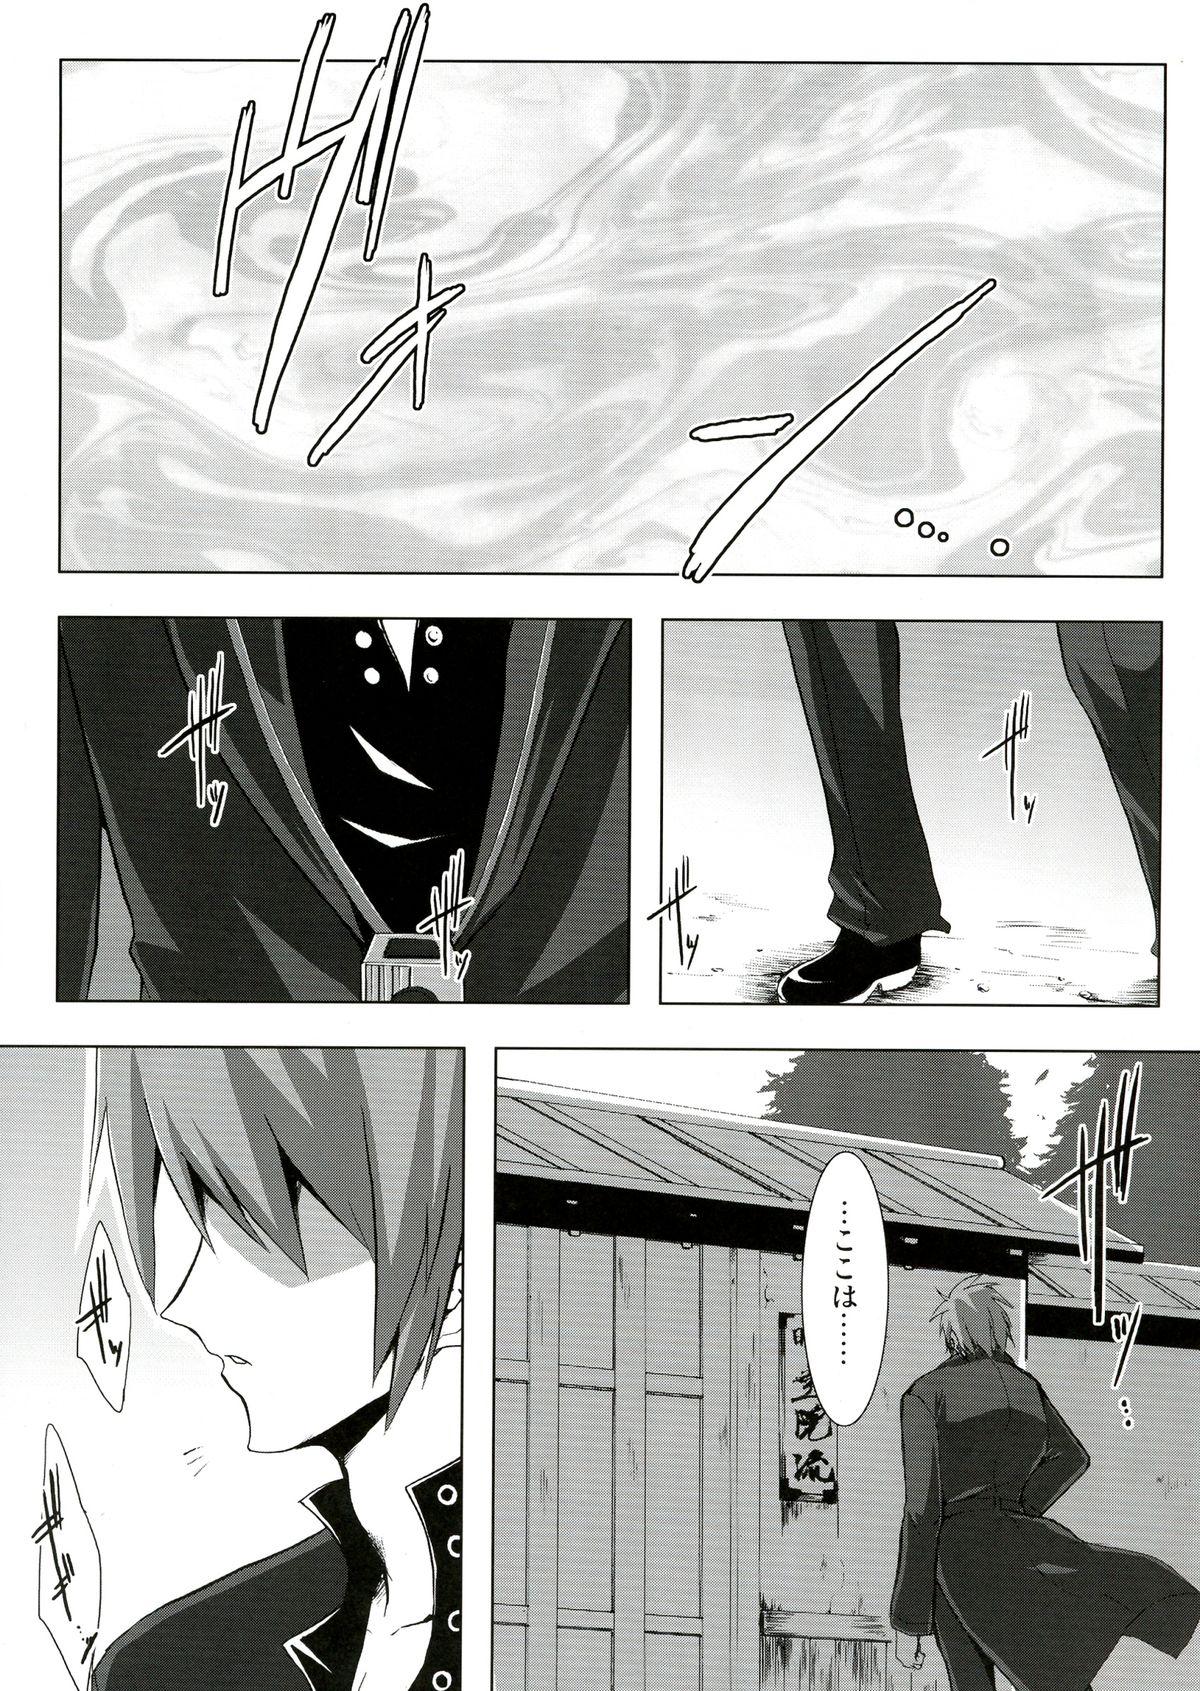 Butthole SILHOUETTE HEART - Heartcatch precure Gay 3some - Page 5